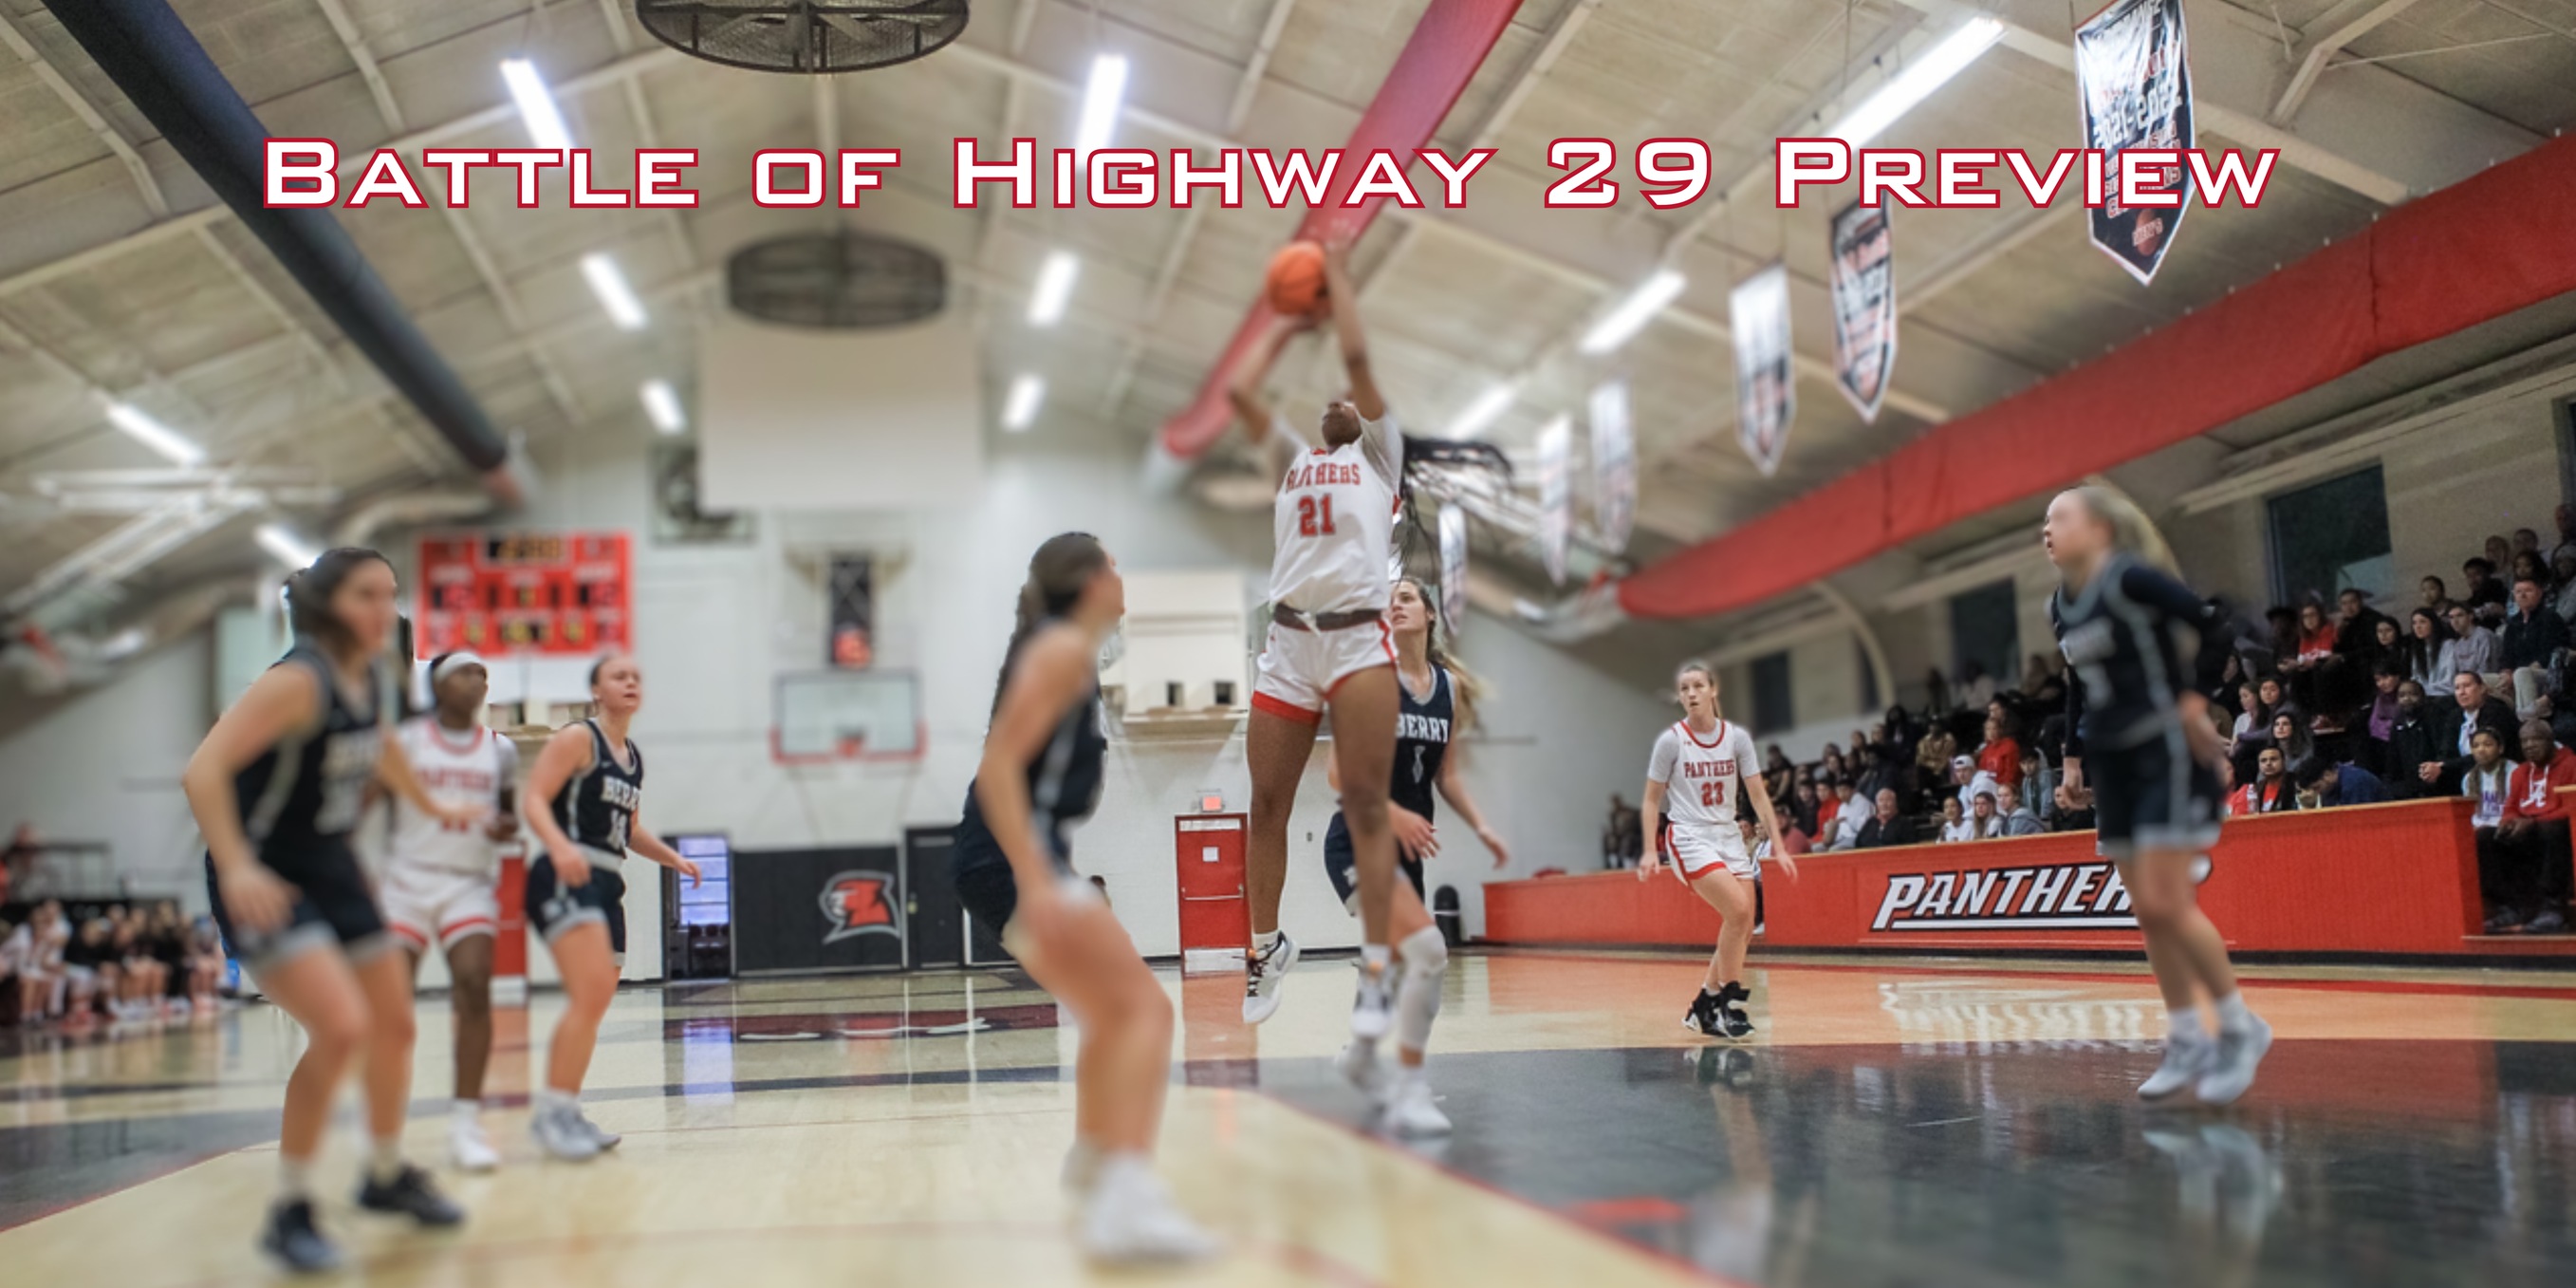 Women’s basketball kicks off the home doubleheader for the Battle of Highway 29